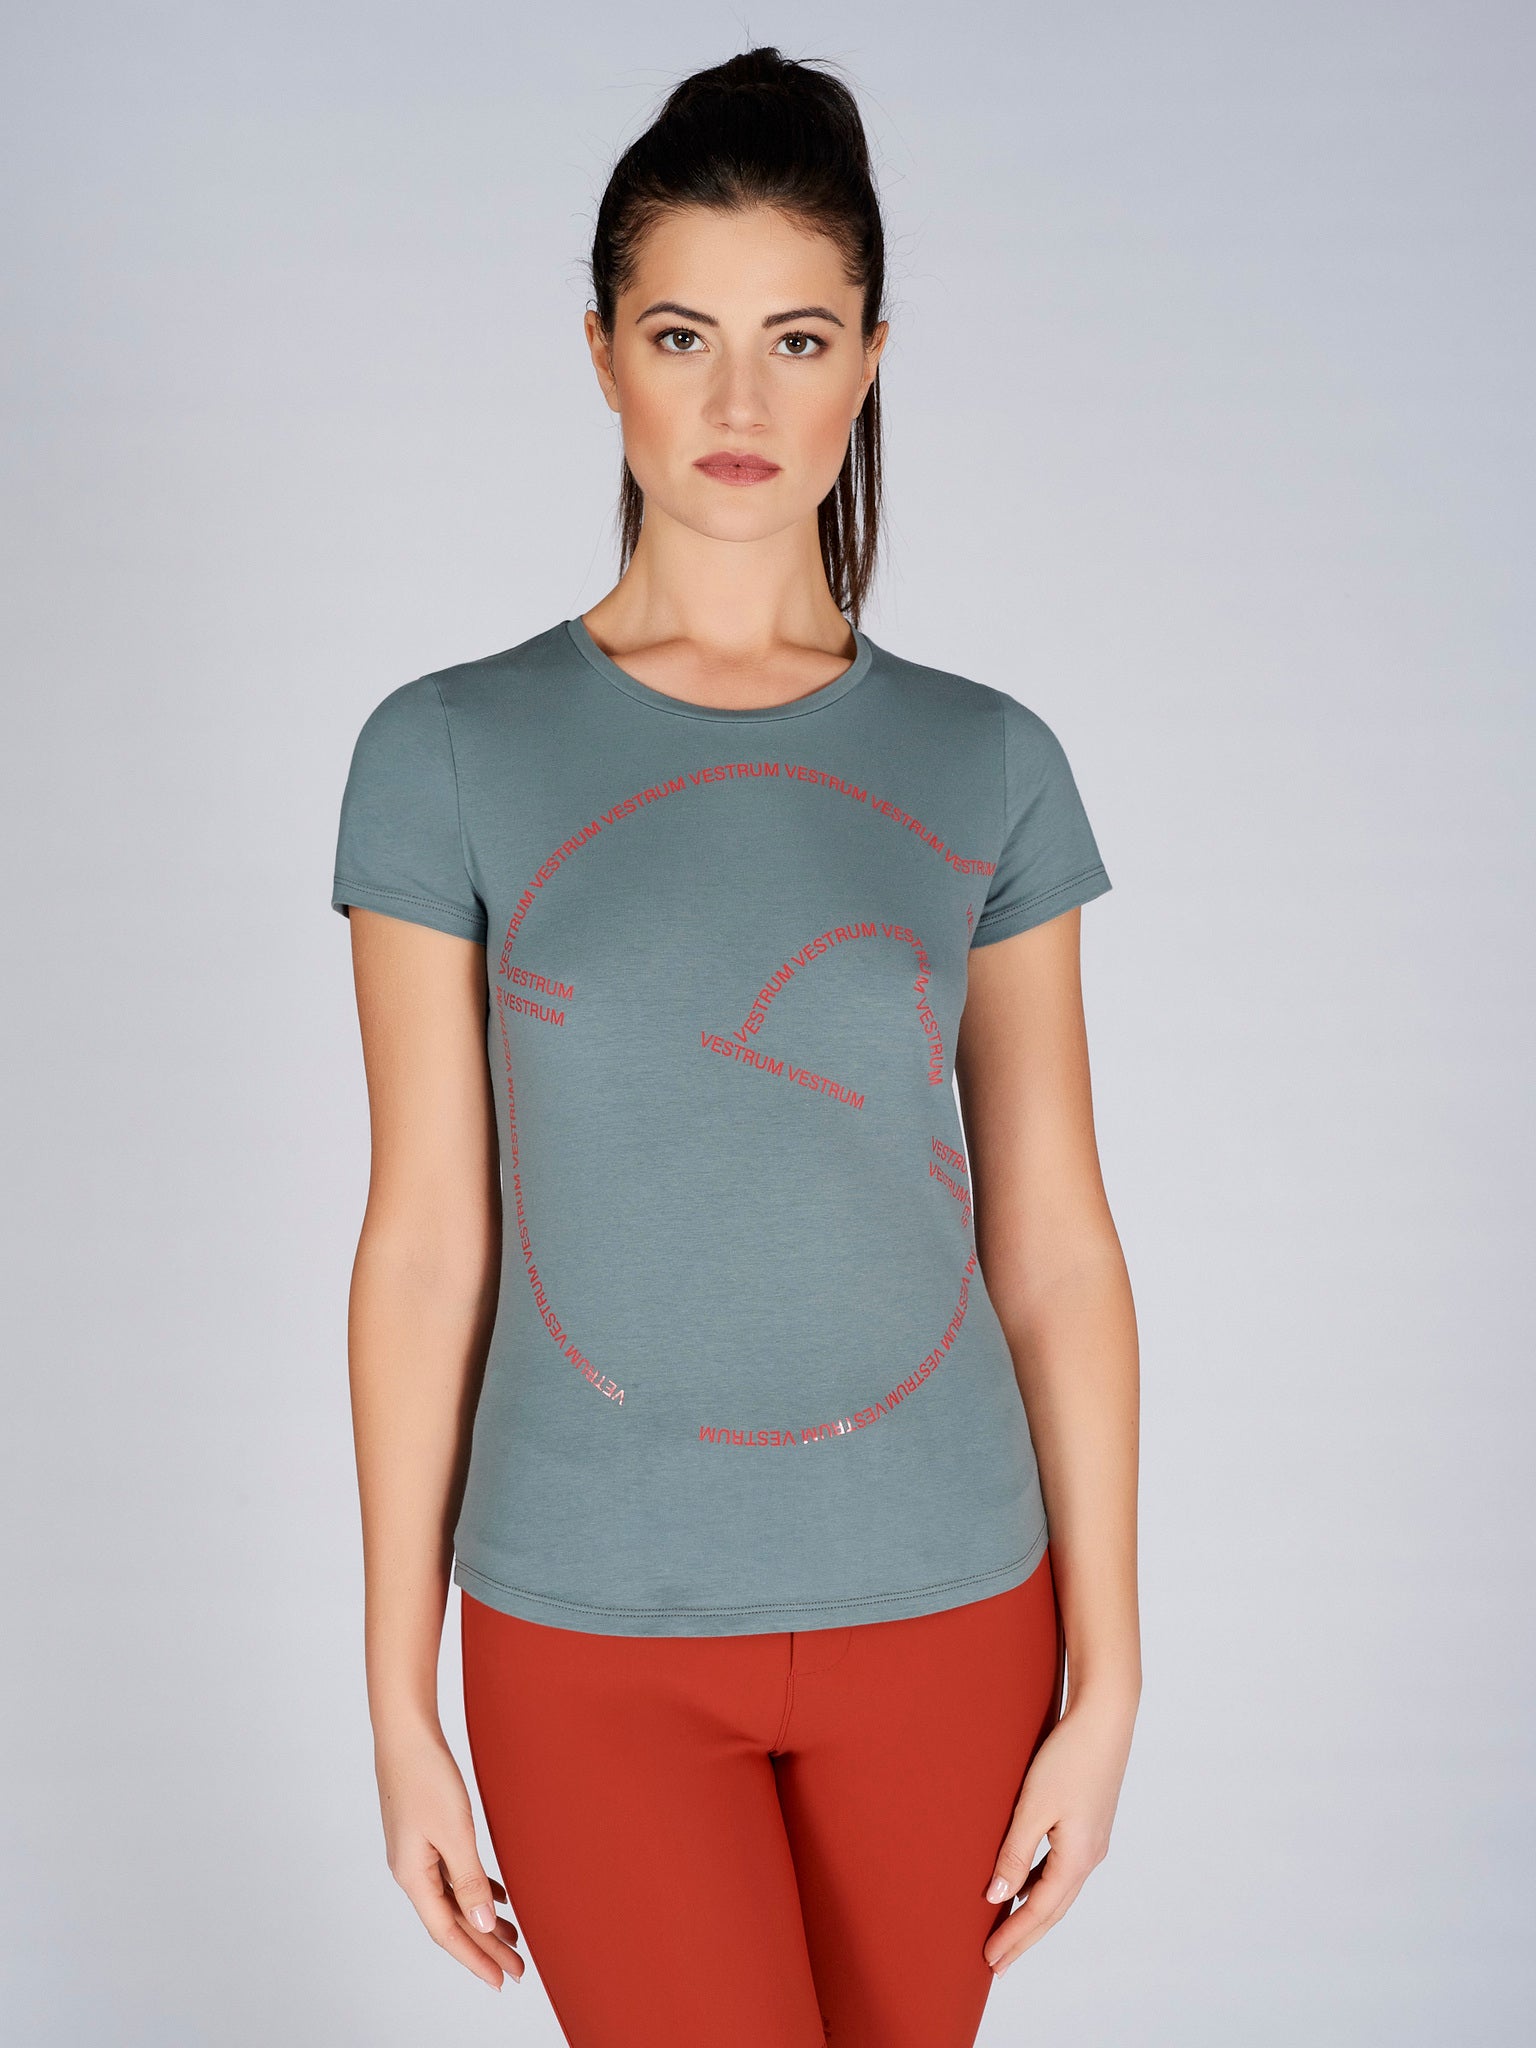 The Vestrum Monterosso Sage S/S T Shirt is perfect for the update for your casual and training wardrobe. Made from a soft bi stretch cotton elastane jersey for maximum comfort. Featuring the Vestrum graphic logo across the front.  coordinate with the Syracuse sage green breeches to complete the look. 